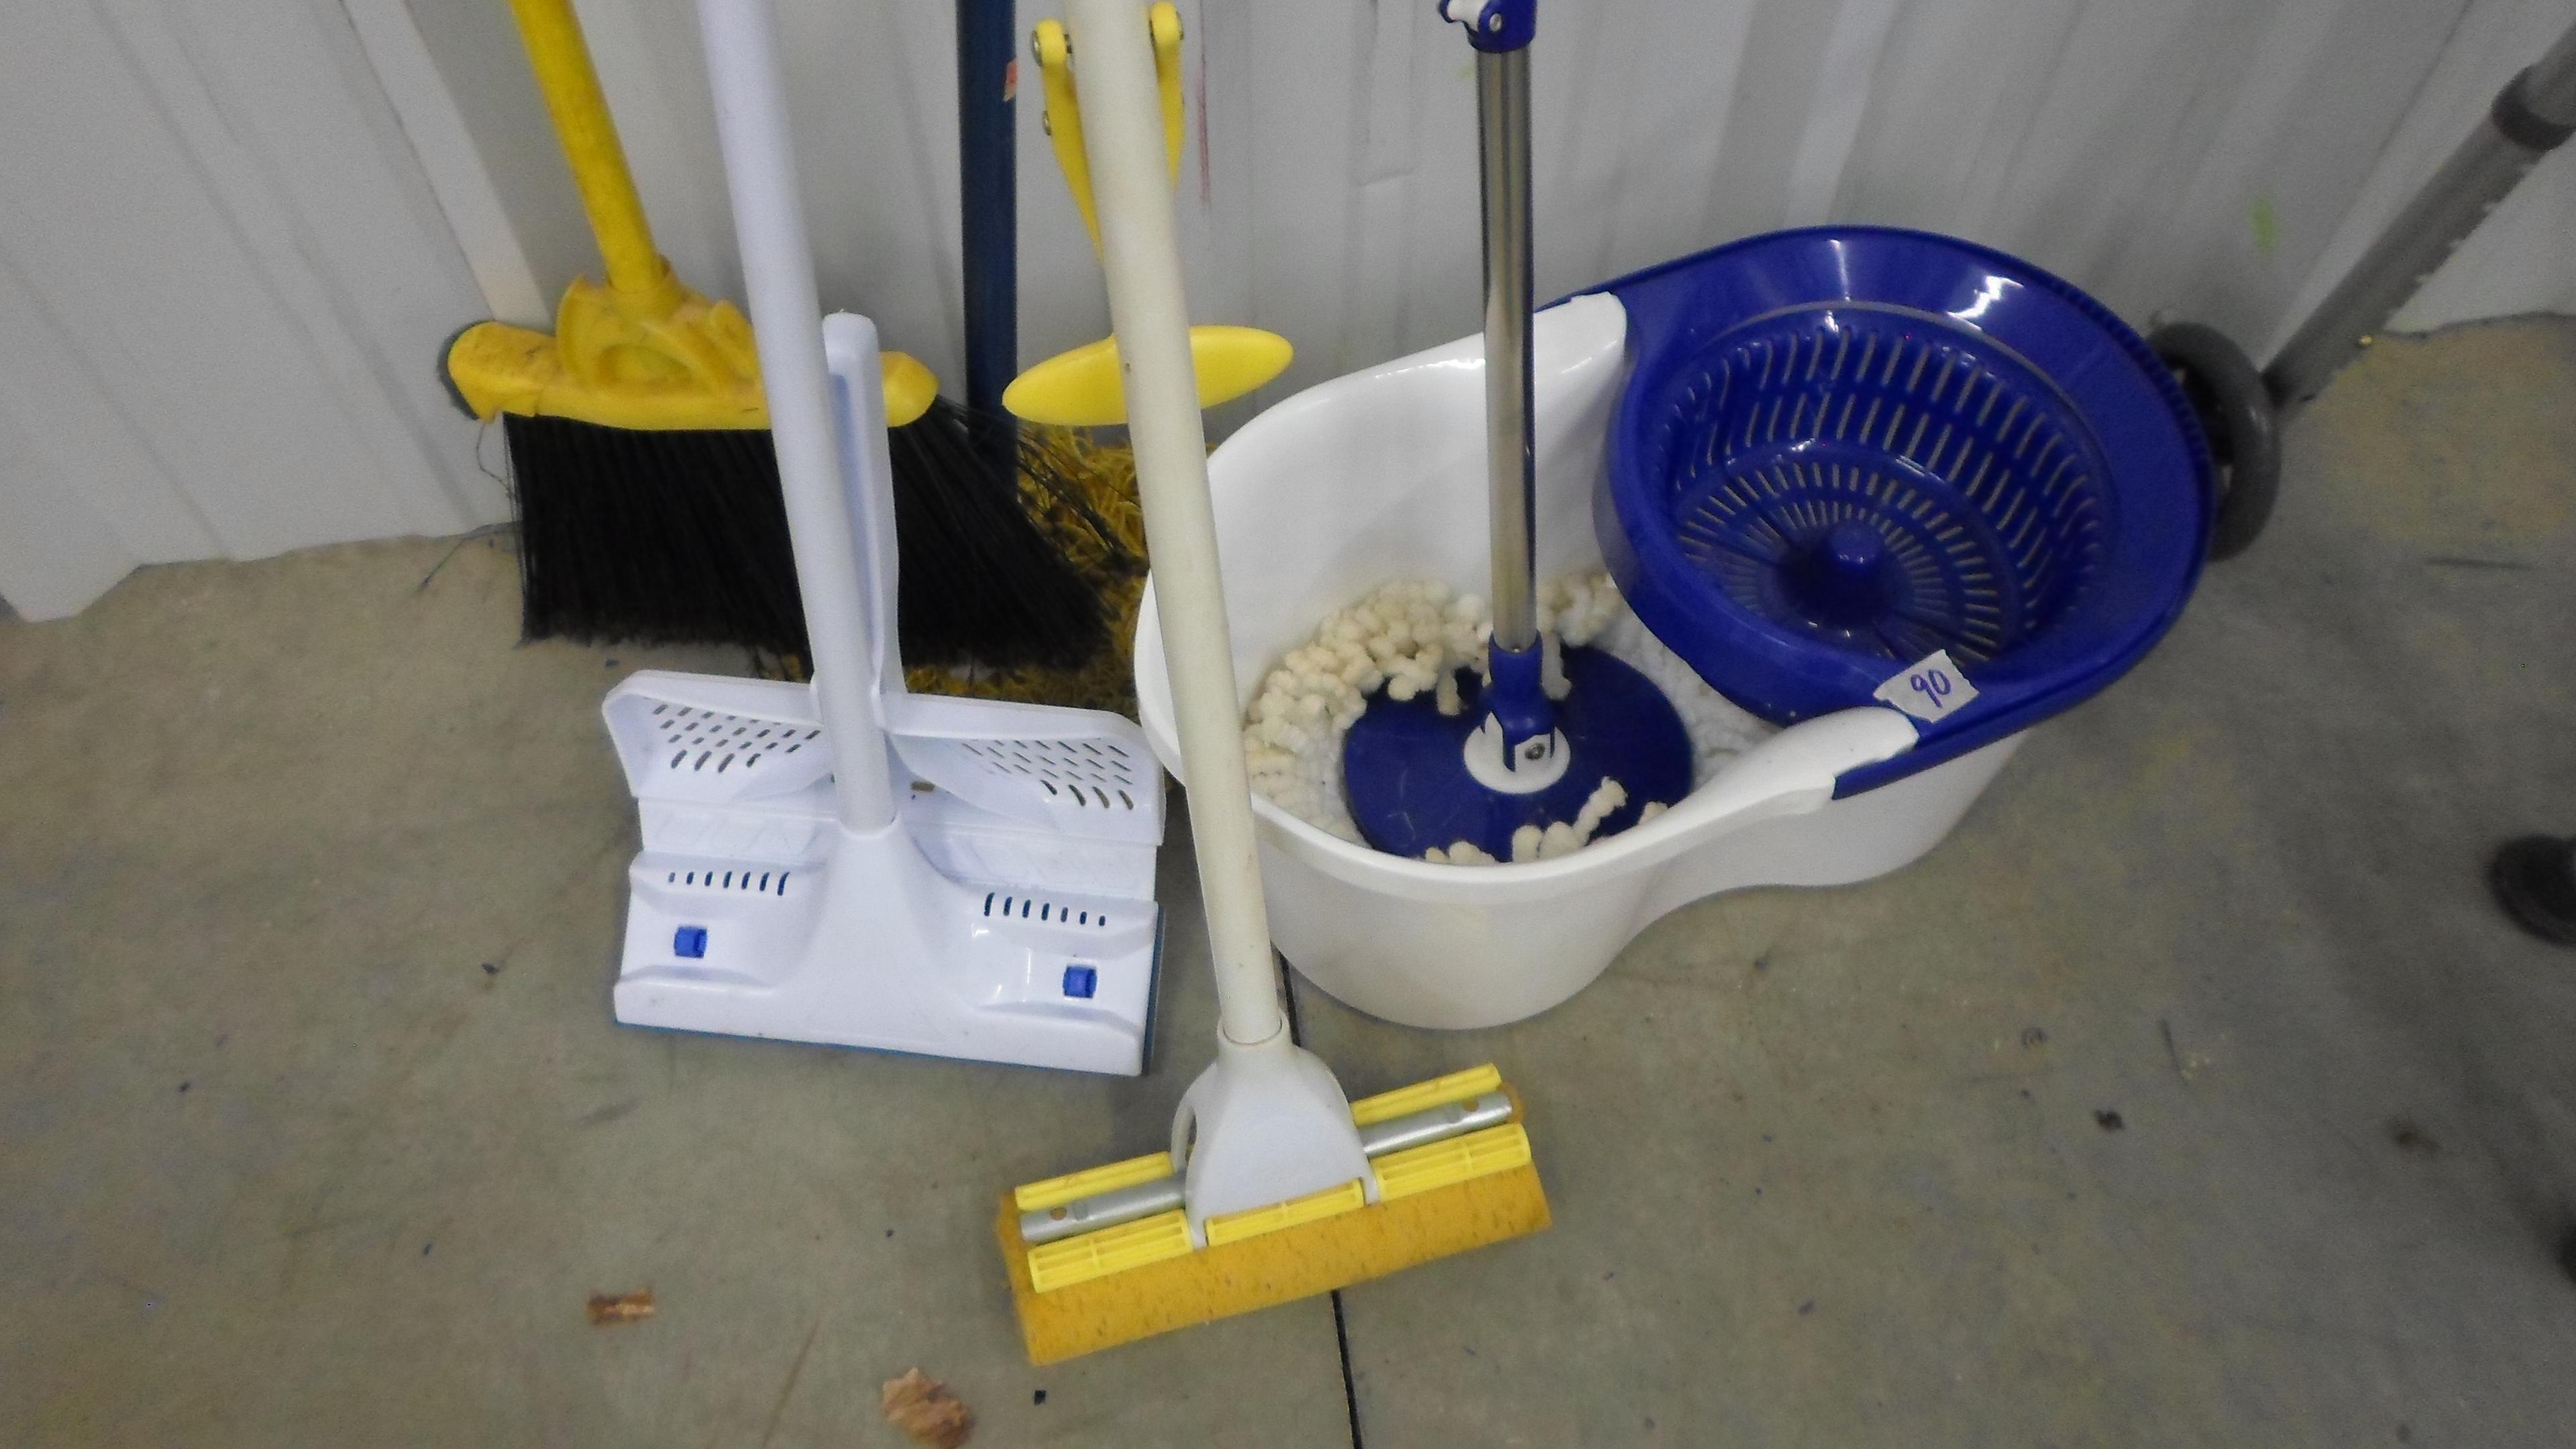 cleaning supplies, mops, duster, broom and a hands free mop bucket